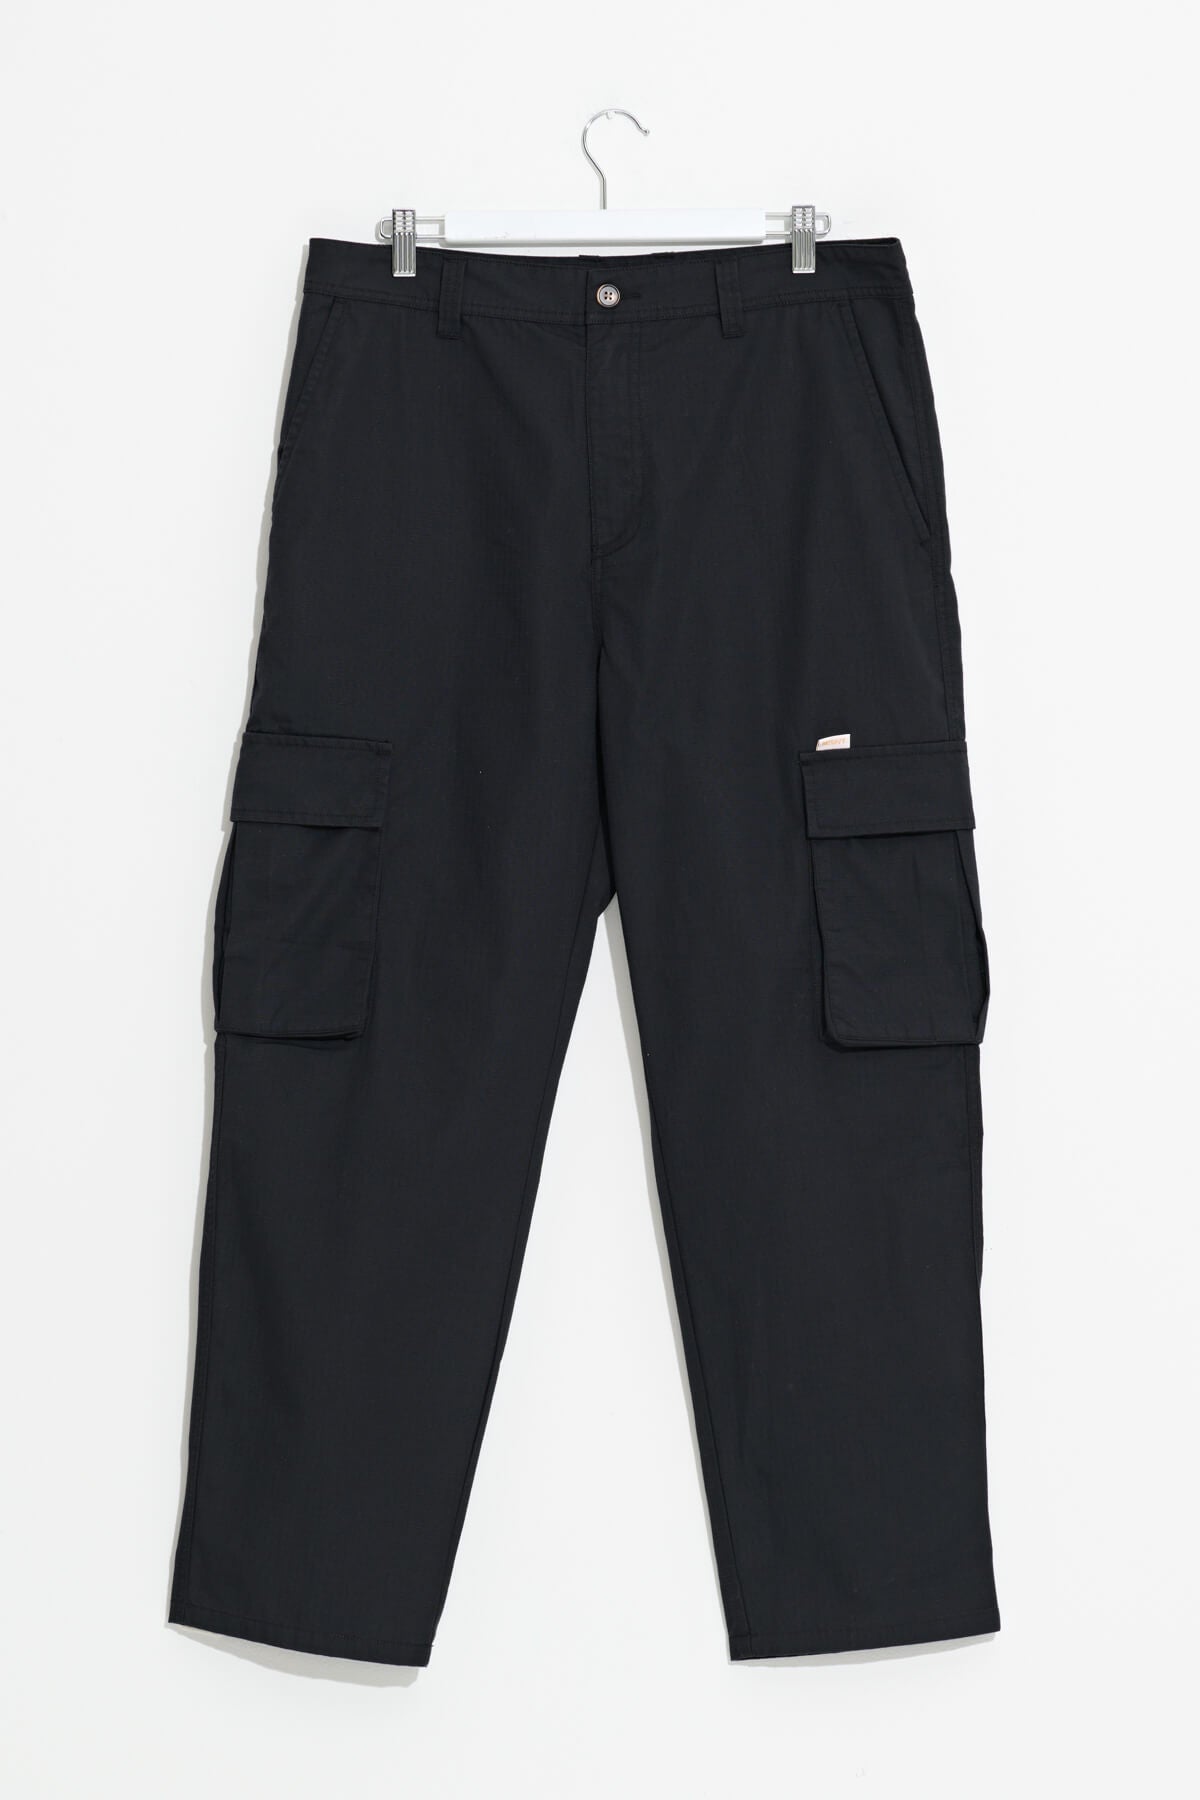 Misfit Shapes - Green Onions Cargo Pant - Black Ripstop